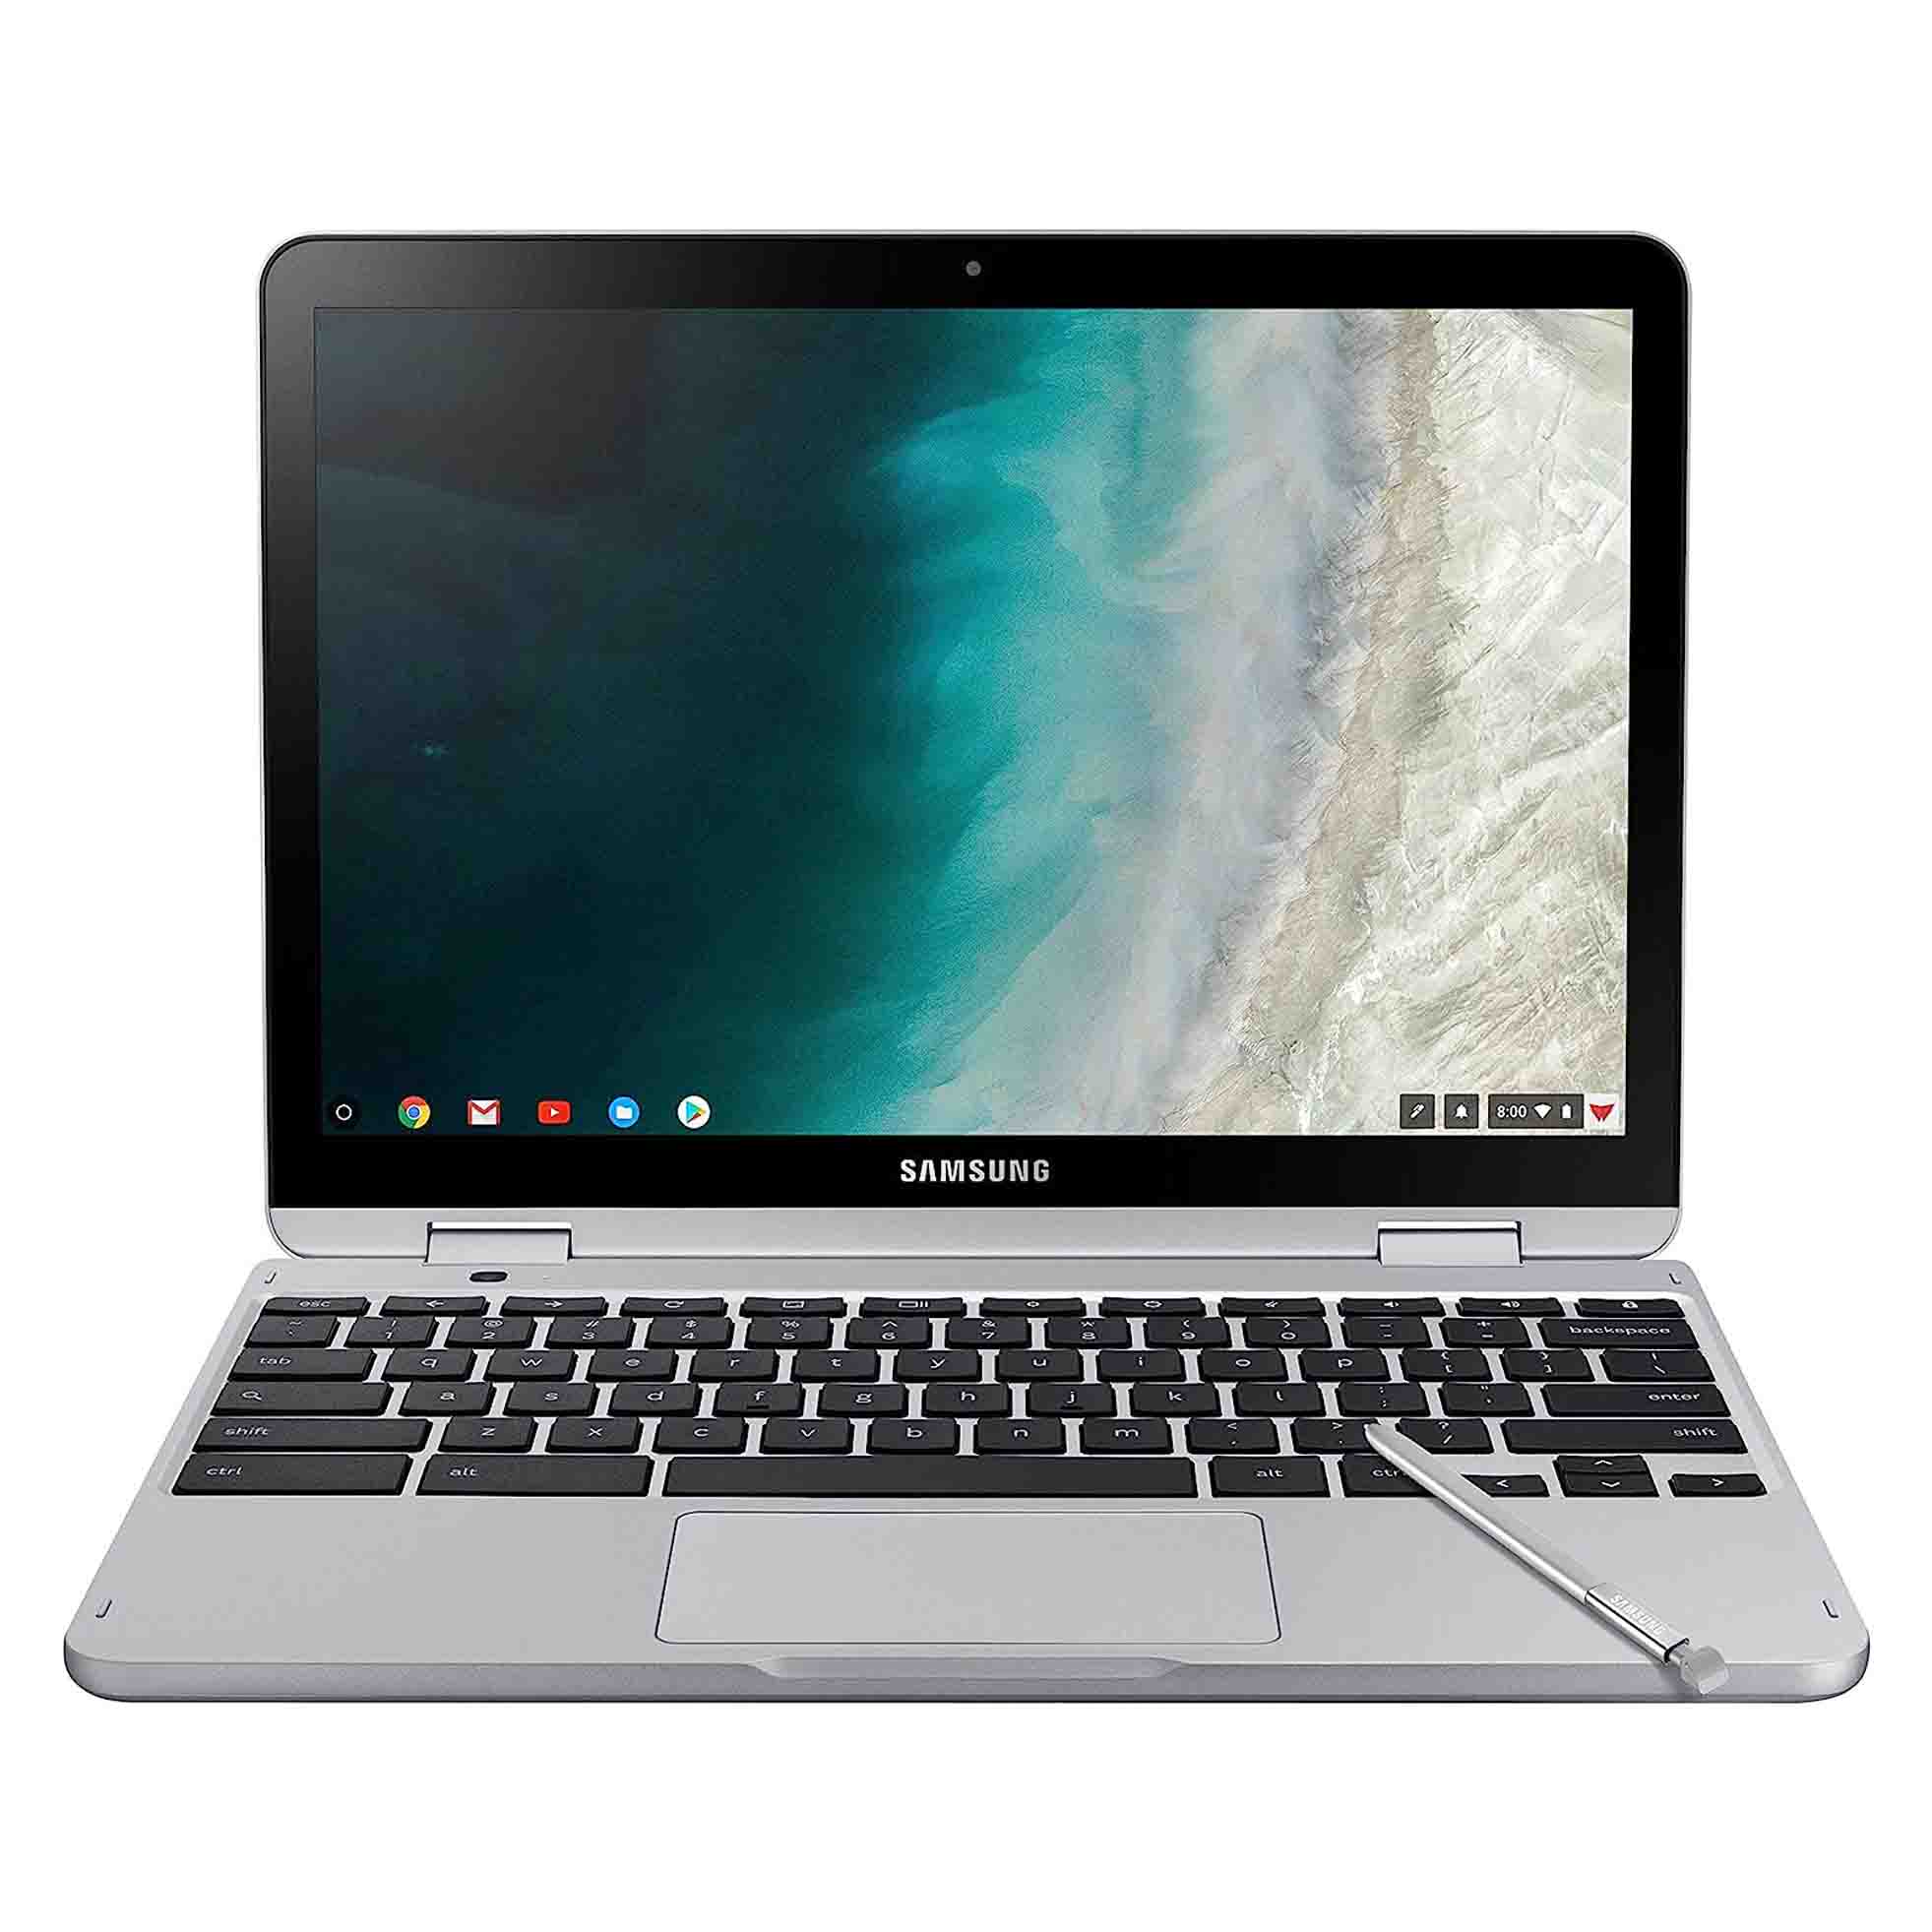 Samsung Chromebook Plus V2 laptop with a matching stylus pen